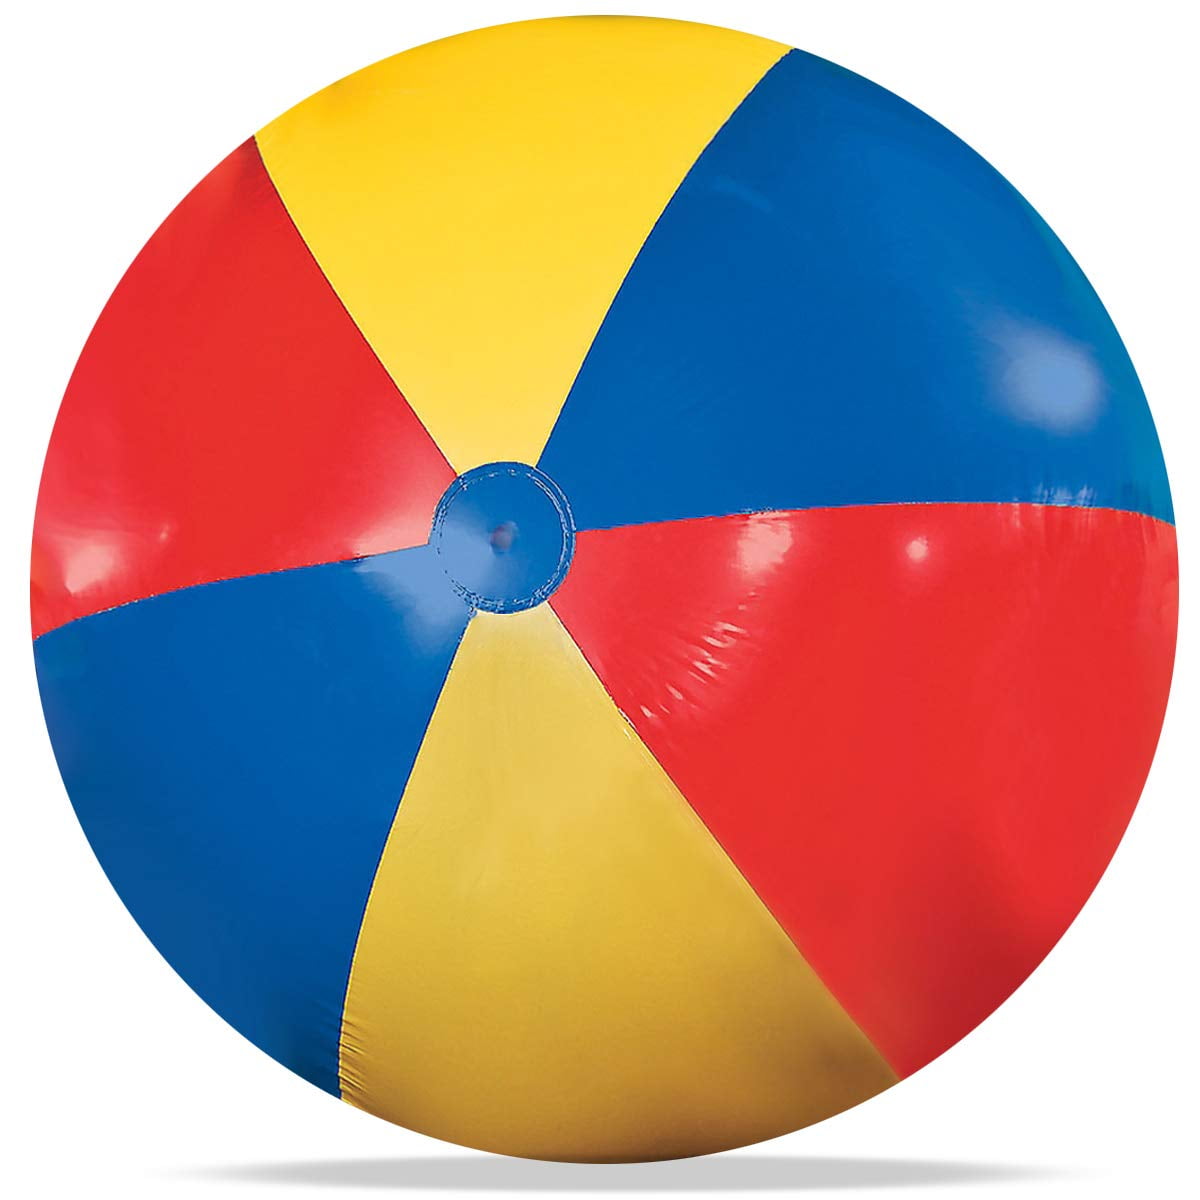 Classic 24" Jumbo Beach Ball 6-Color Inflatable Water Toy